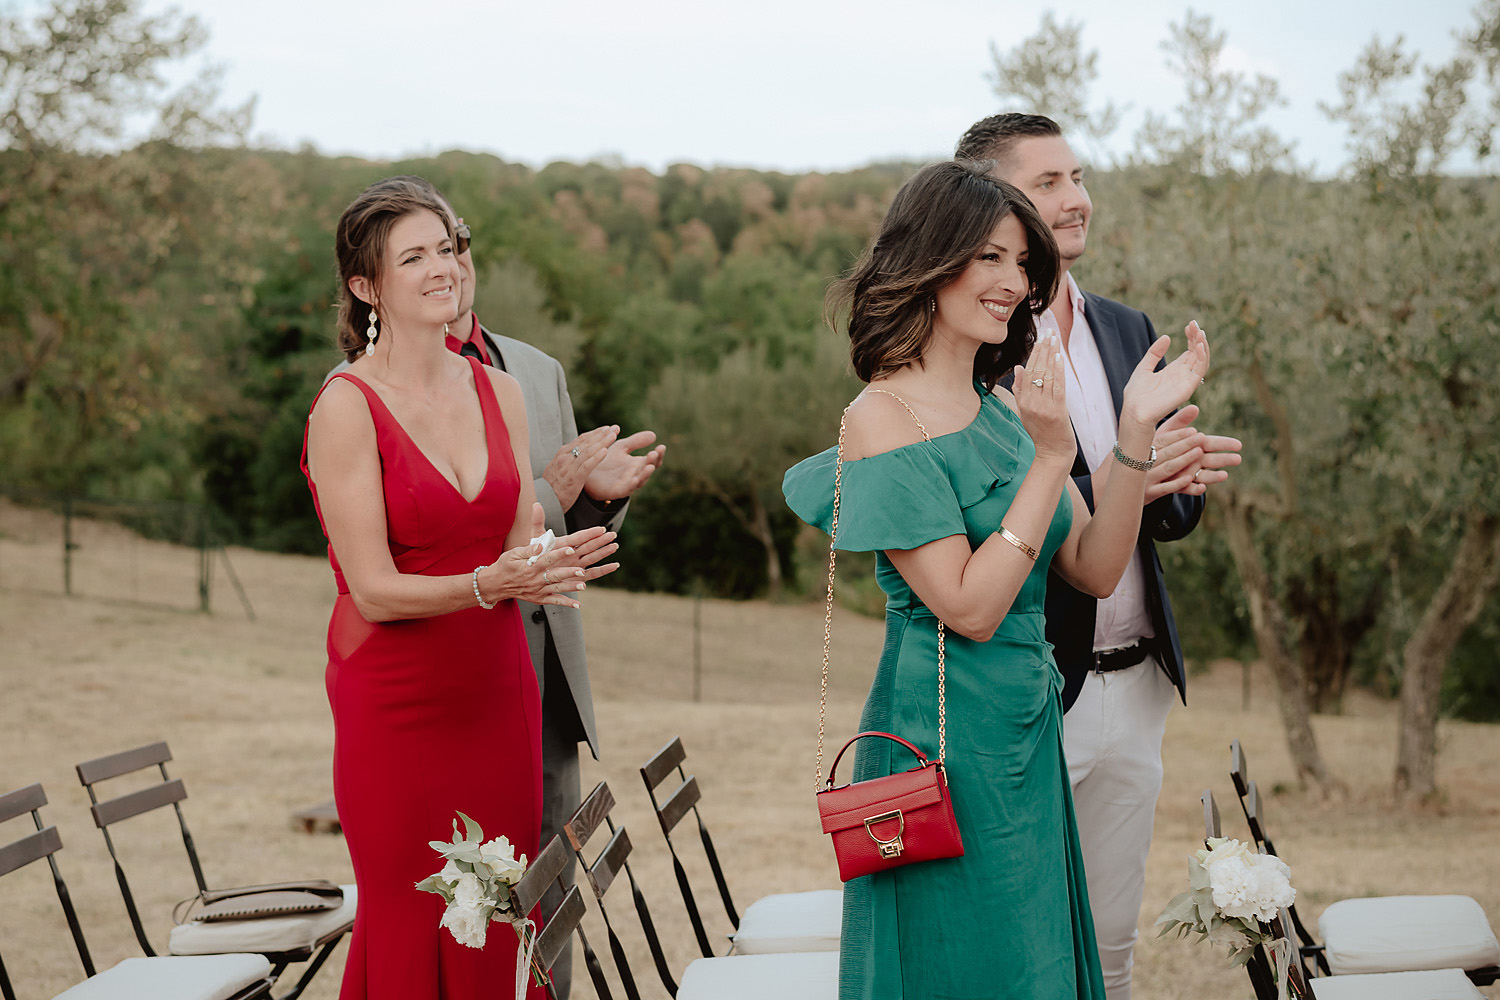 intimate micro wedding in tuscany rustic outdoor ceremony photographs